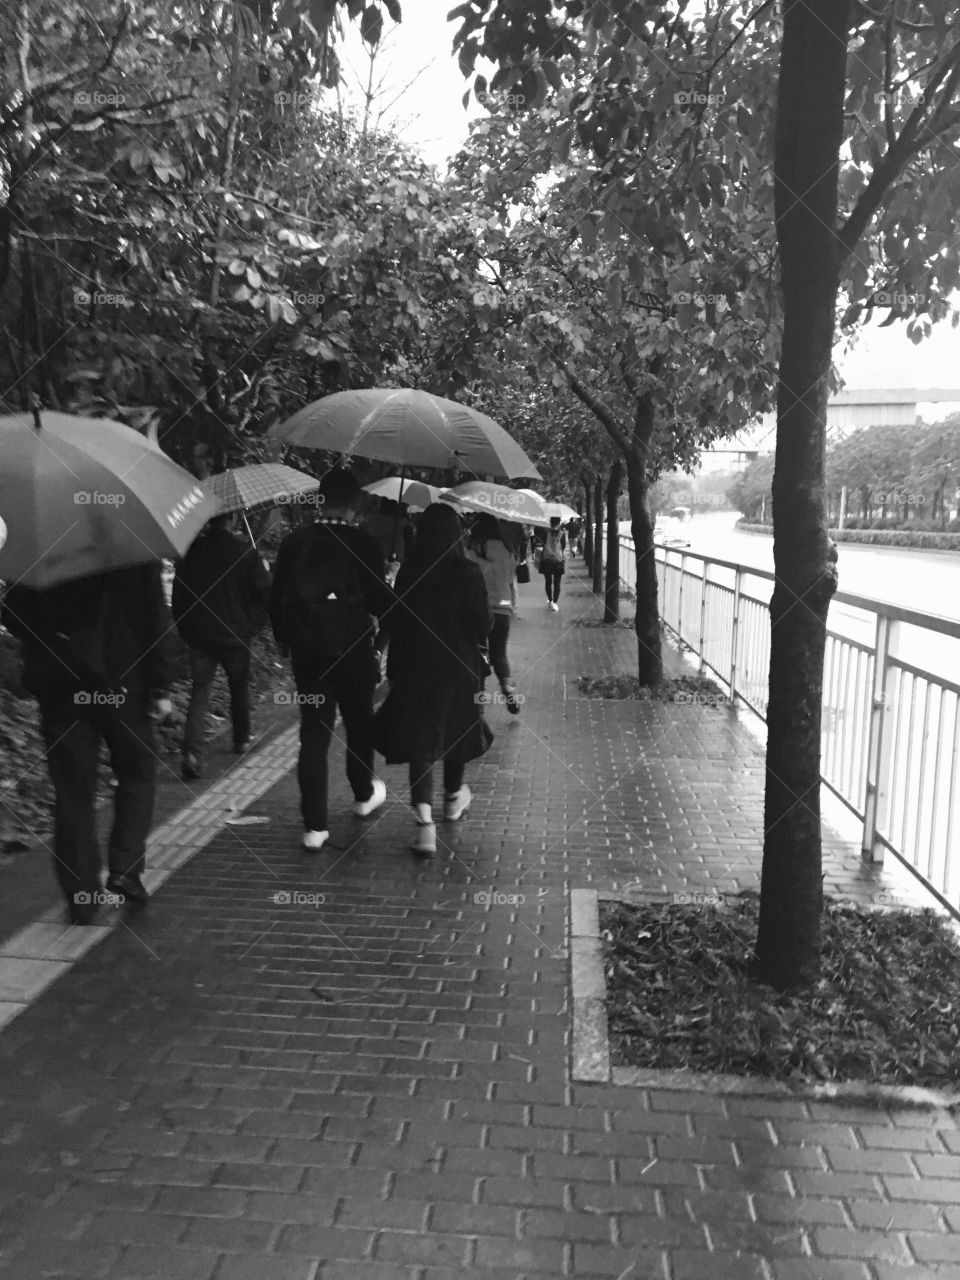 Commuters Walking with Umbrellas in the Rain - Shenzhen, China